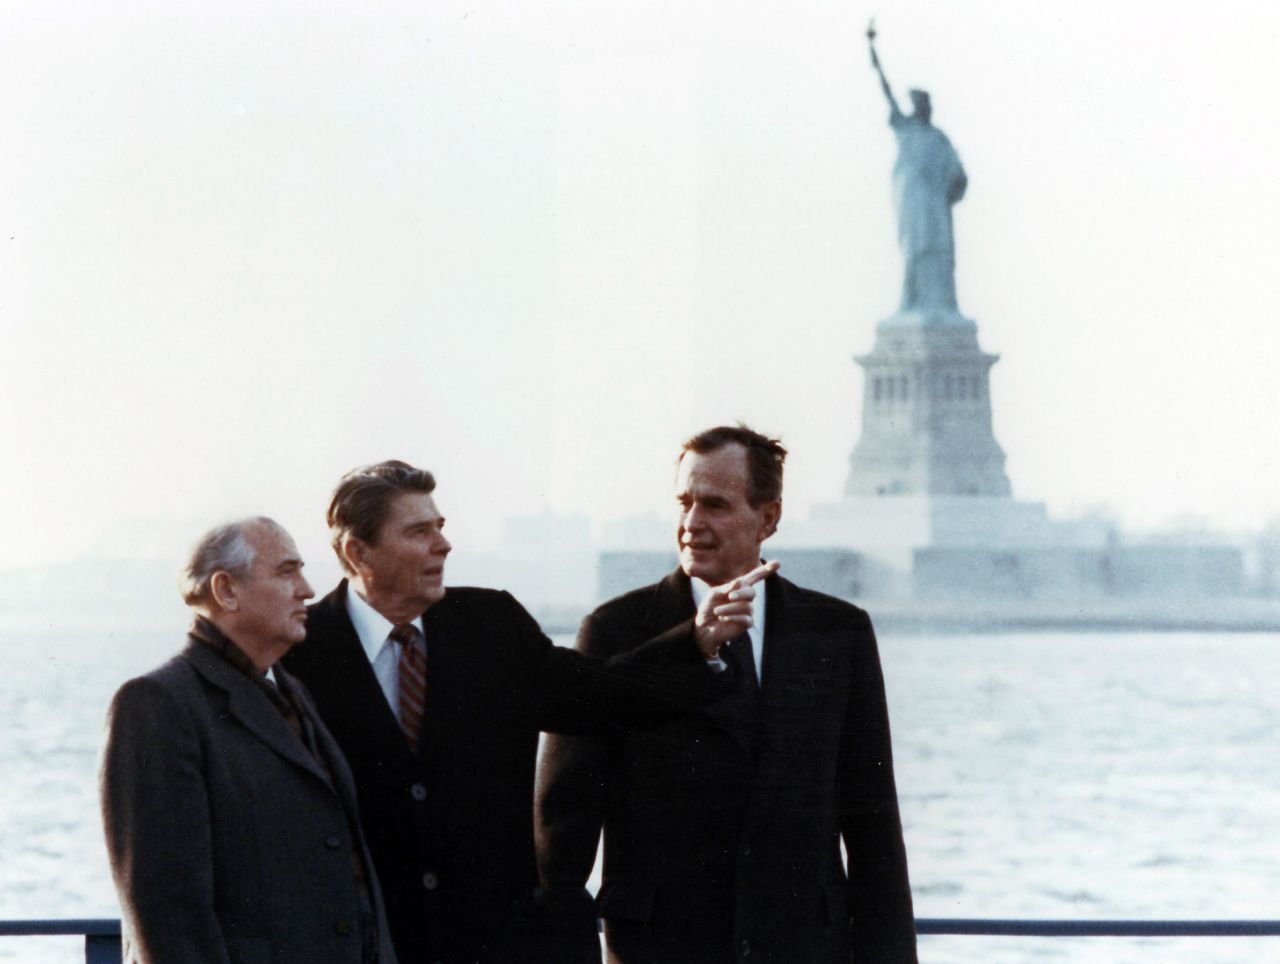 Gorbachev visits New York with Reagan and US Vice President George H.W. Bush in December 1988.